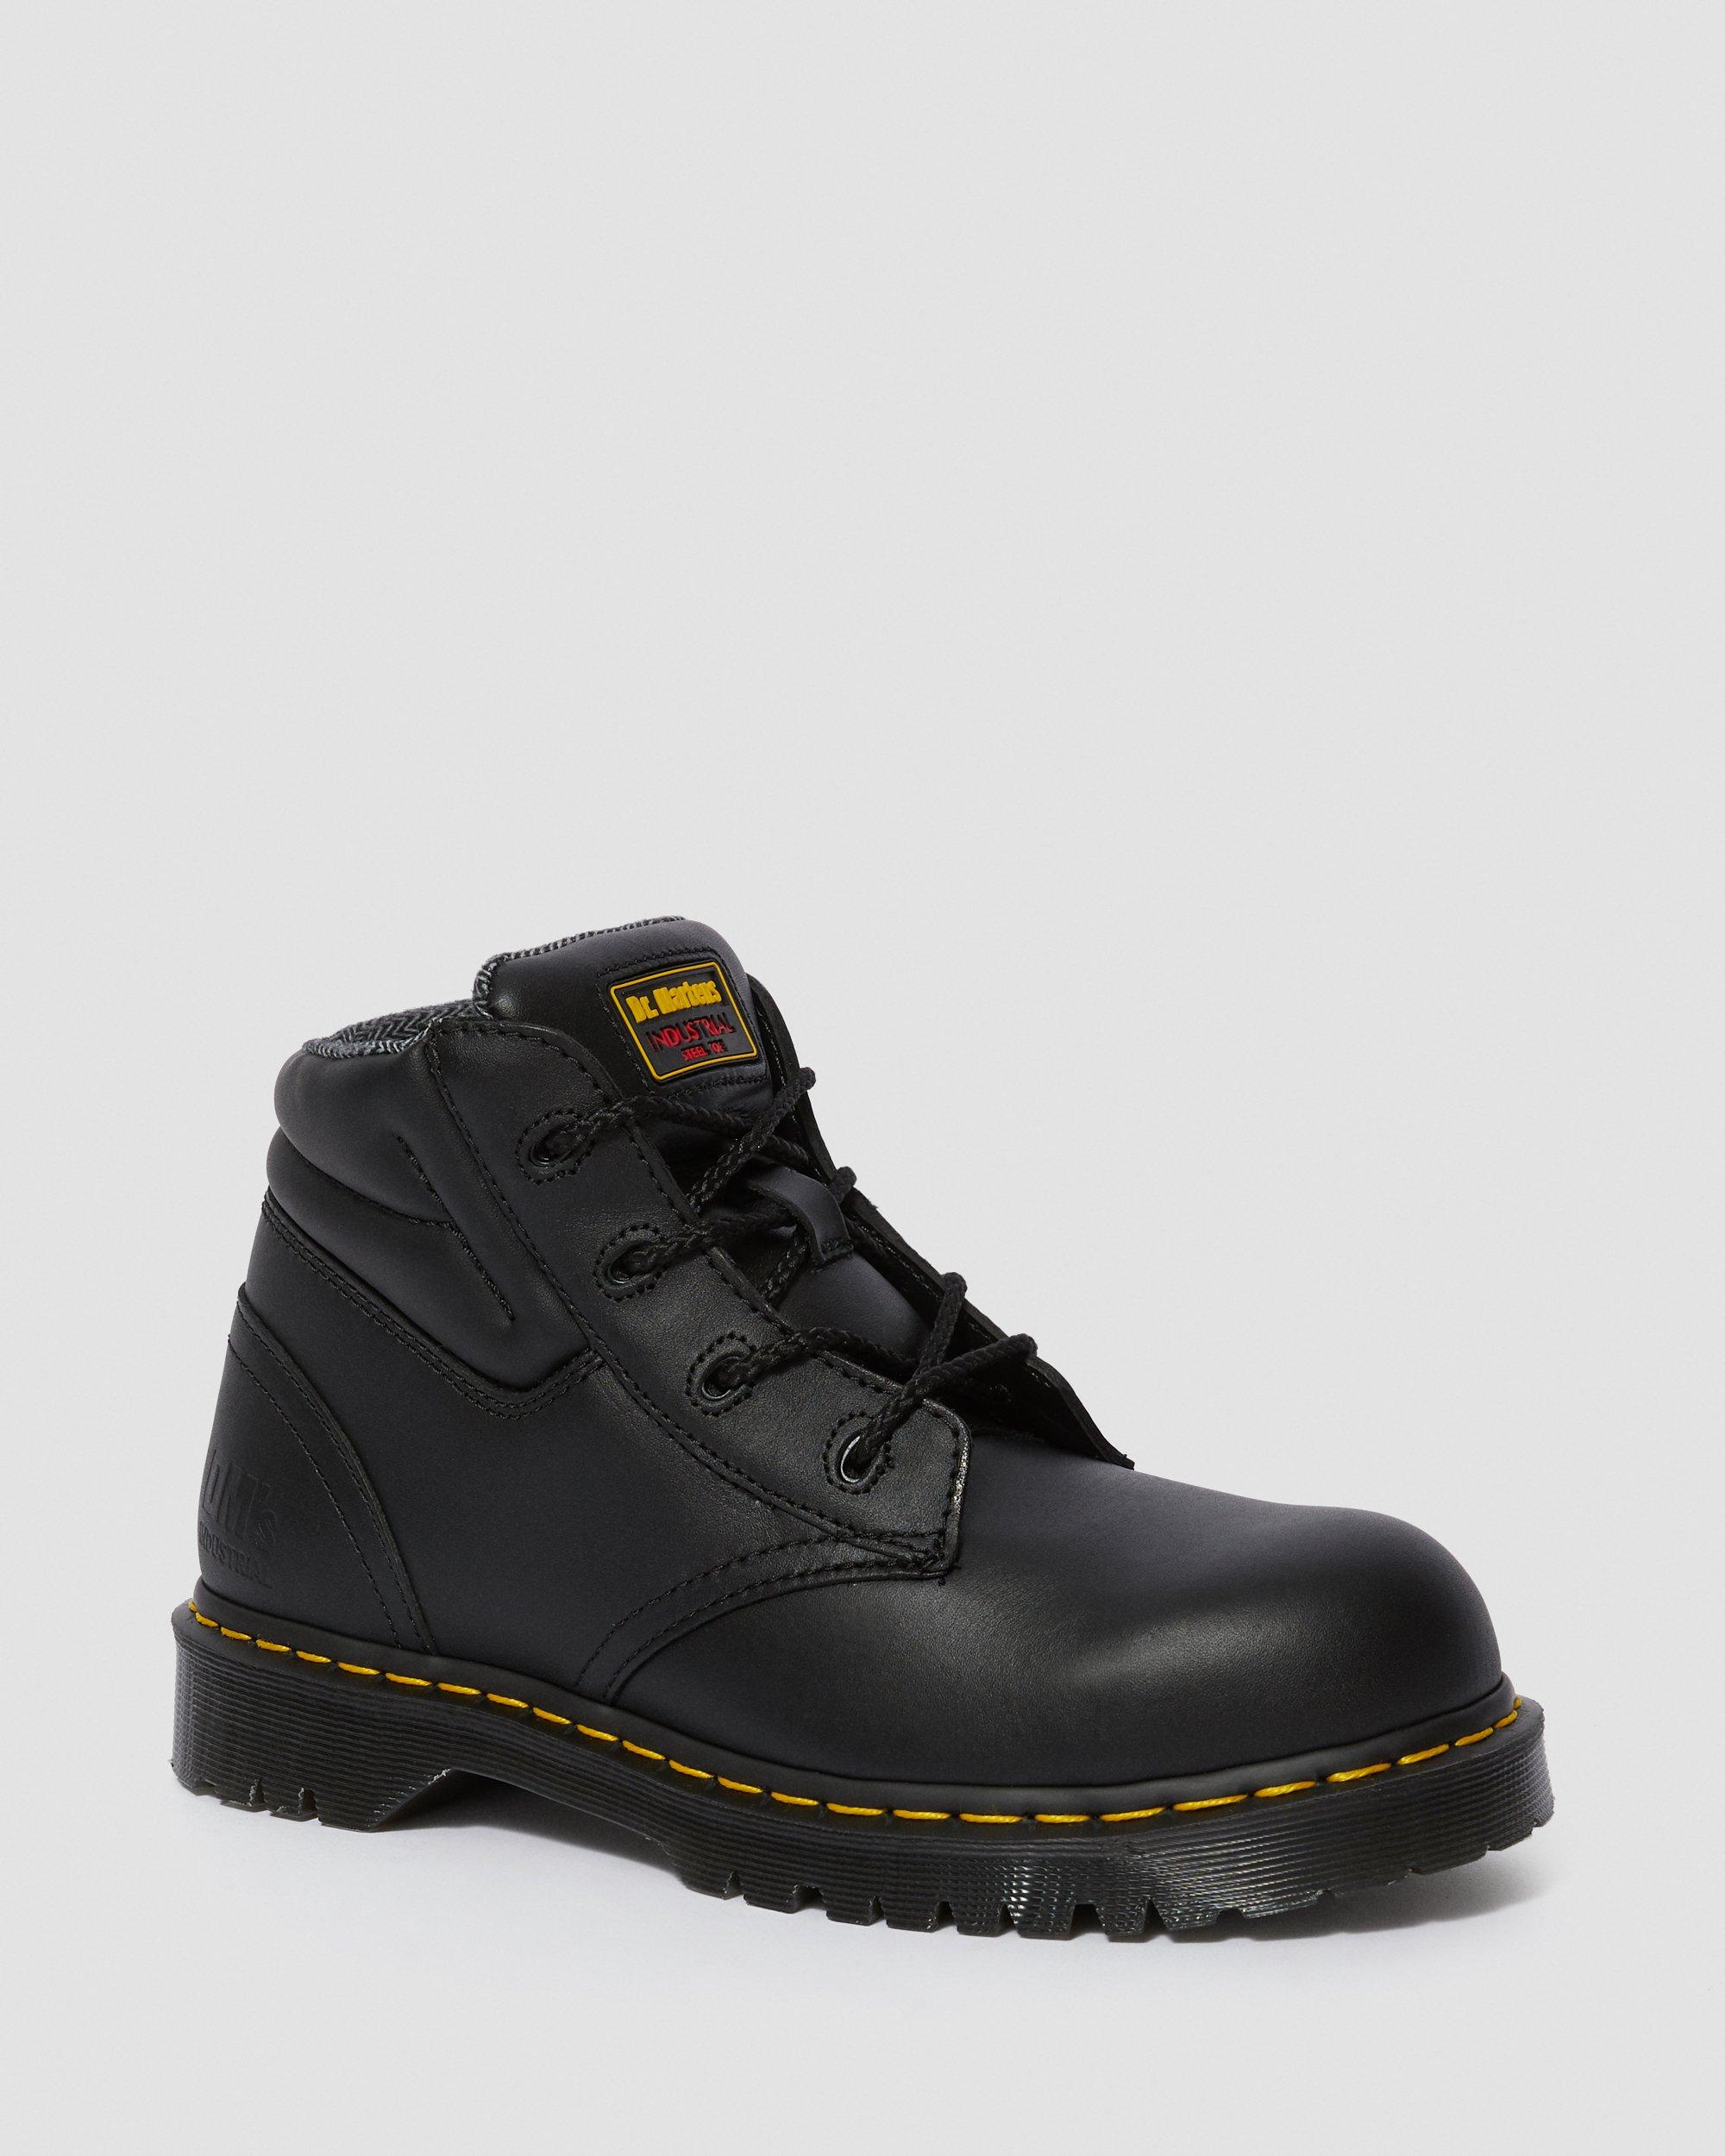 Dr Martens Icon Lace up Steel Toe cap Safety Shoe Black Leather Air Cushion Sole 